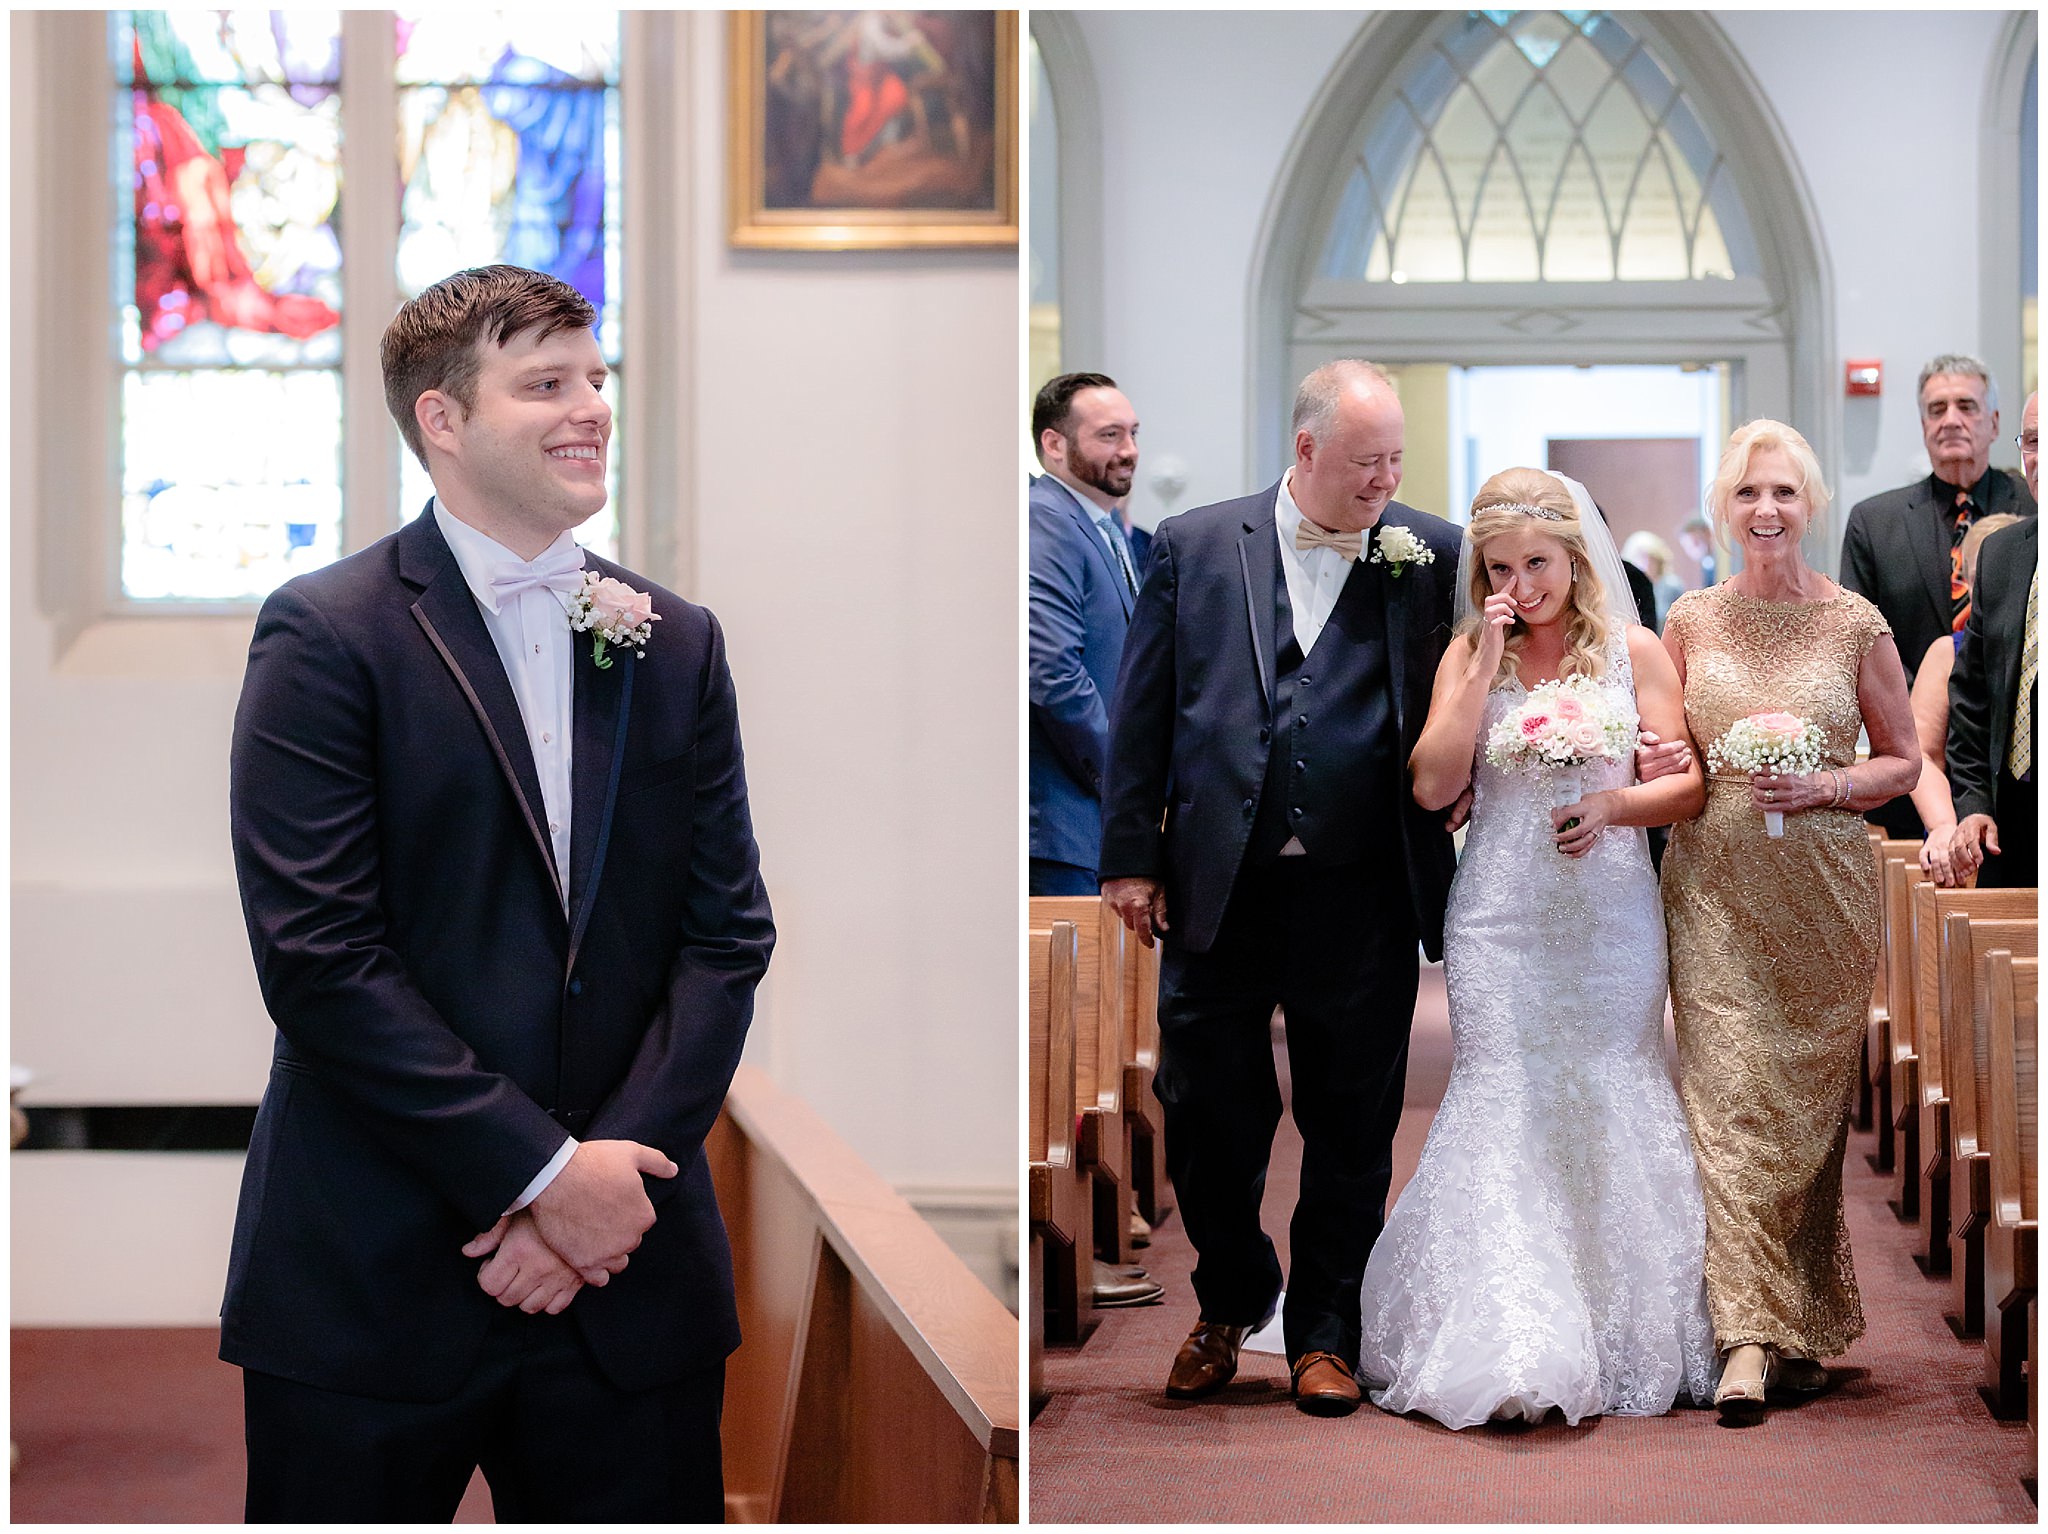 Groom smiles as his bride walks down the aisle at Duquesne University